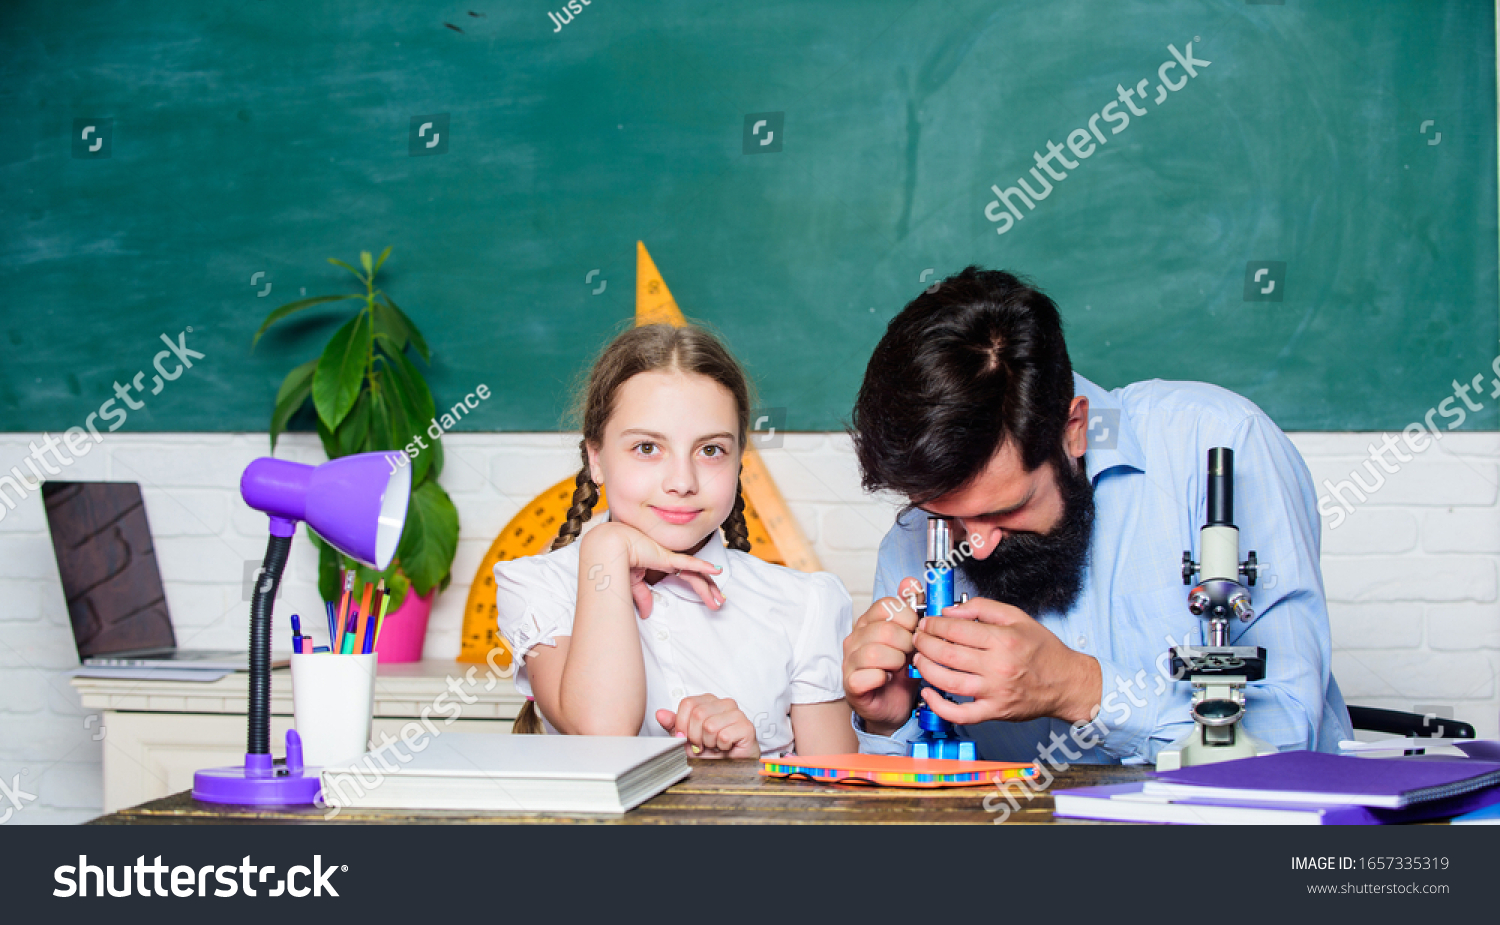 Girl pupil study with bearded teacher. Studying methods for children. School education. Extra classes. Cognitive skills concept. Schoolgirl likes study with father. Study hard. Following example. #1657335319